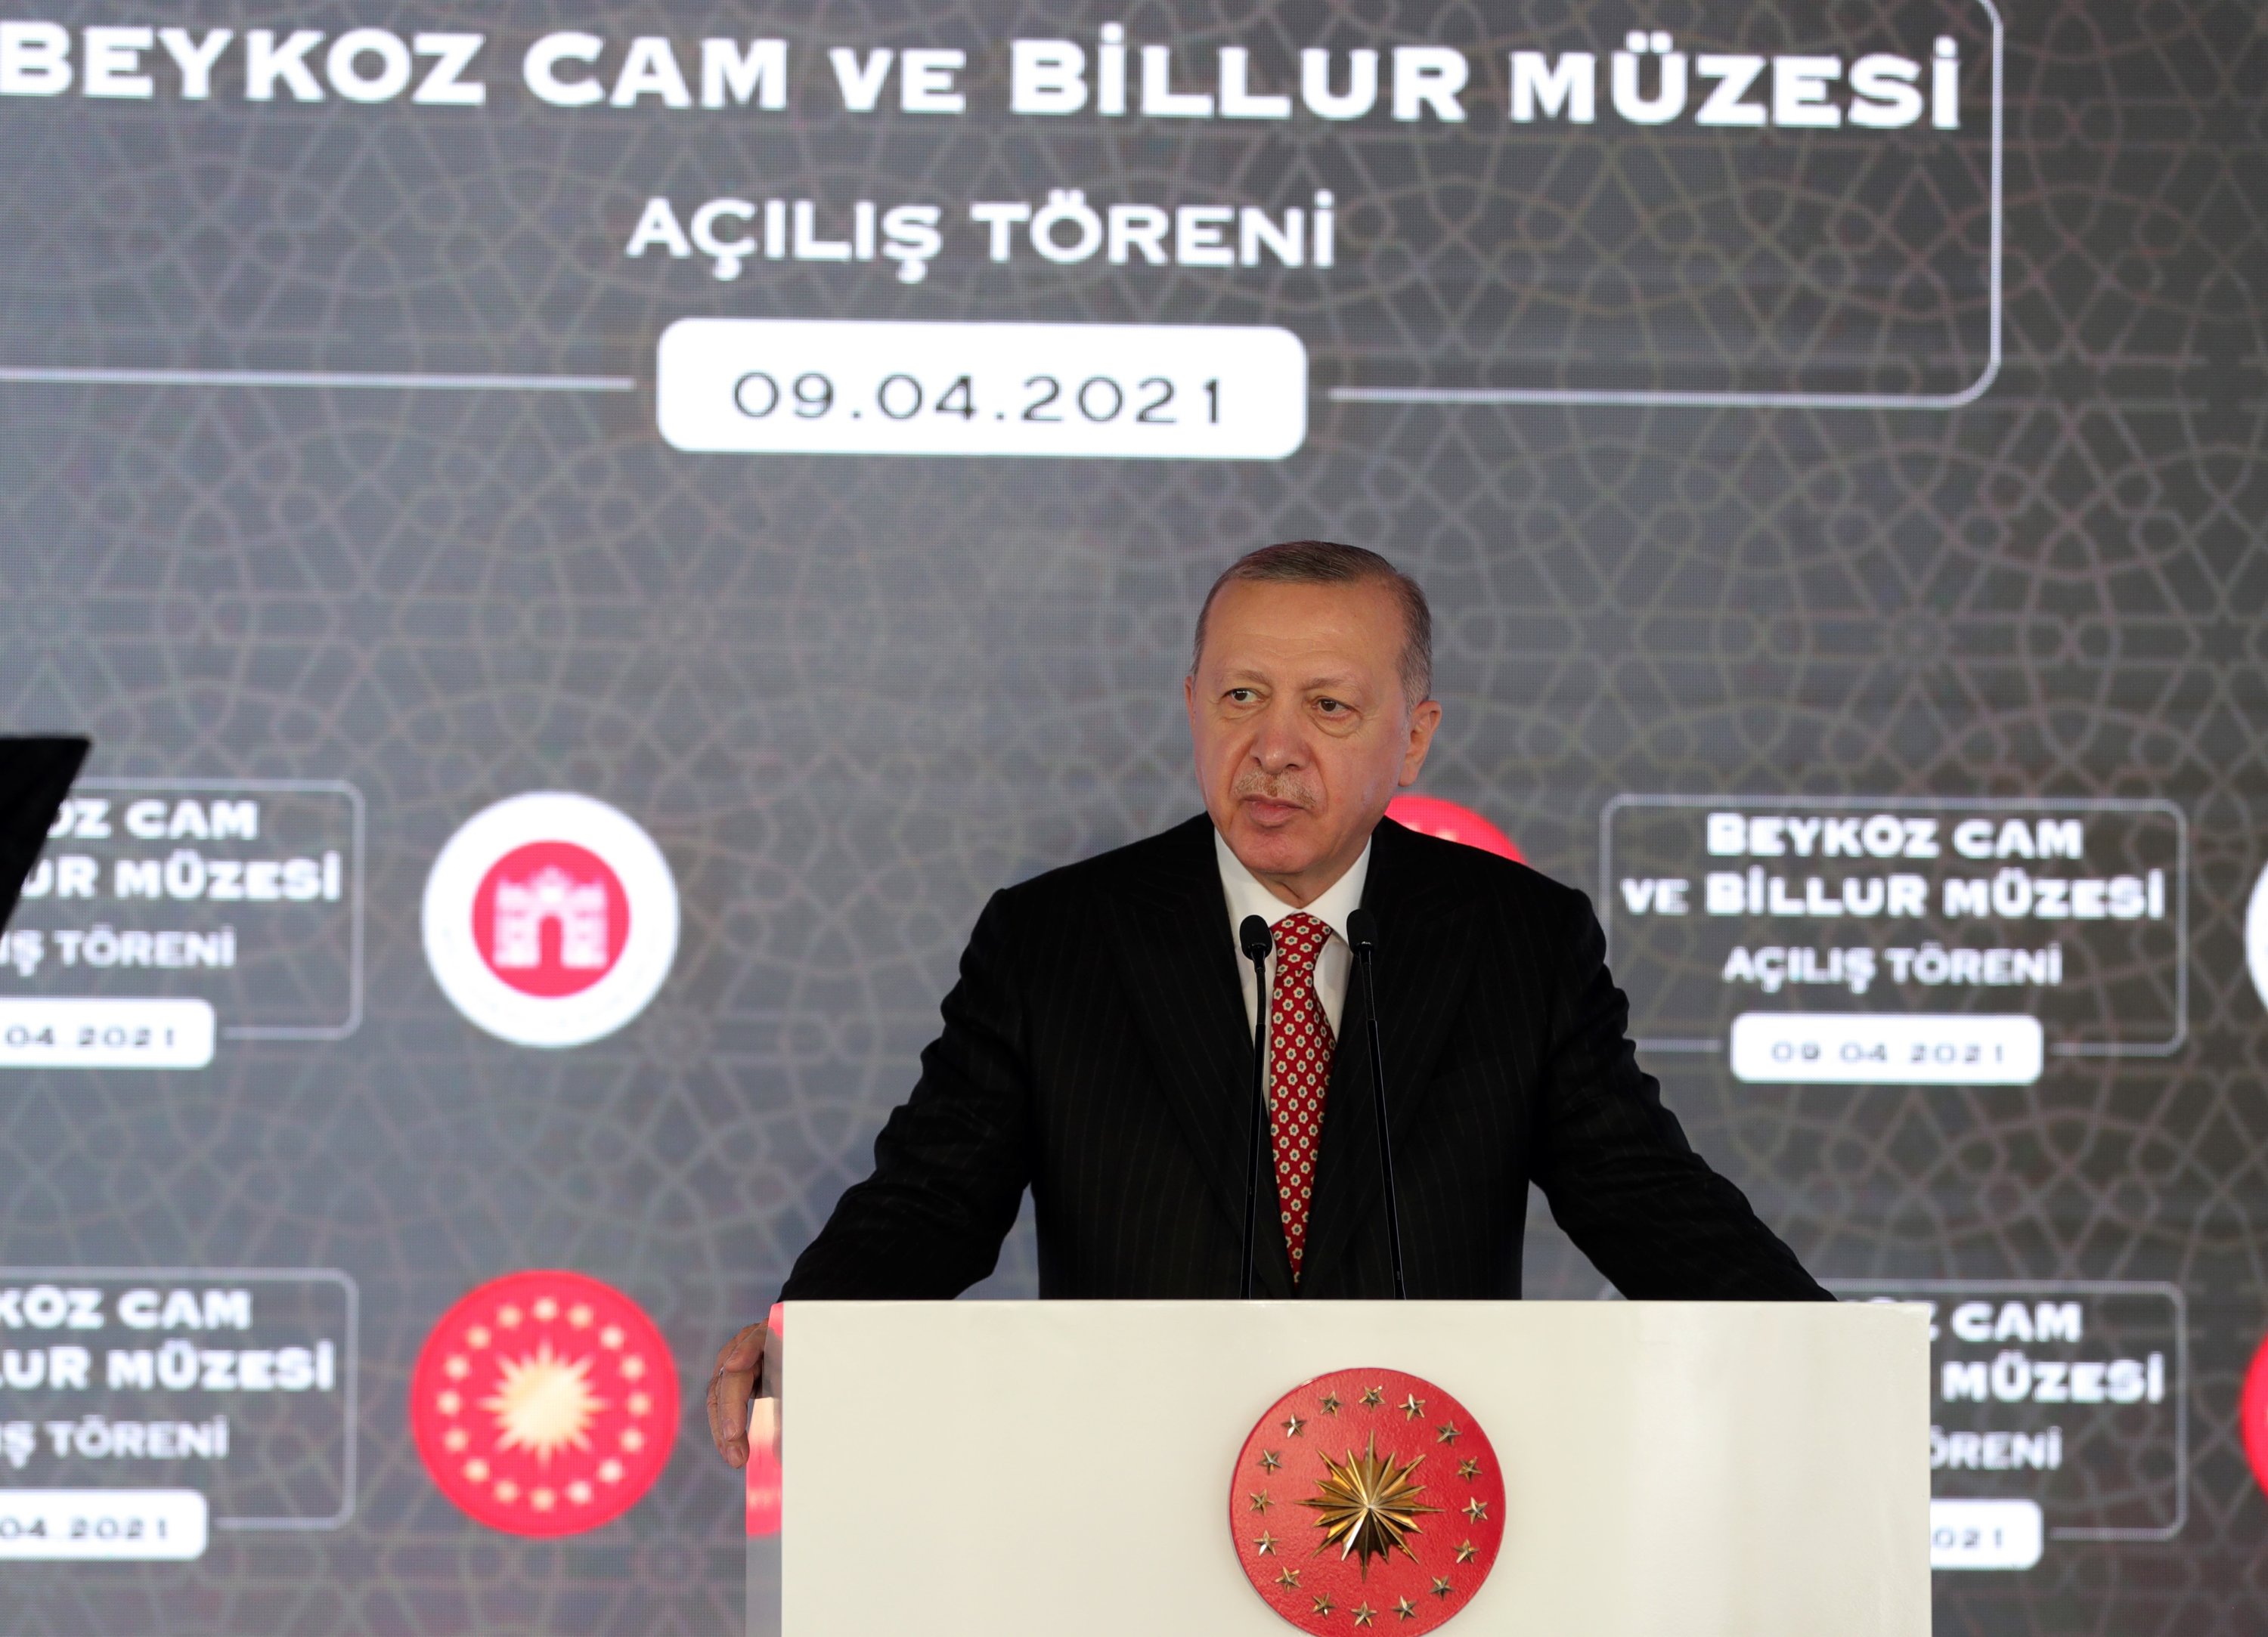 President Recep Tayyip Erdoğan speaks at the opening ceremony of the Beykoz Crystal and Glass Museum in Istanbul, Turkey, April 9, 2021. (AA Photo) 